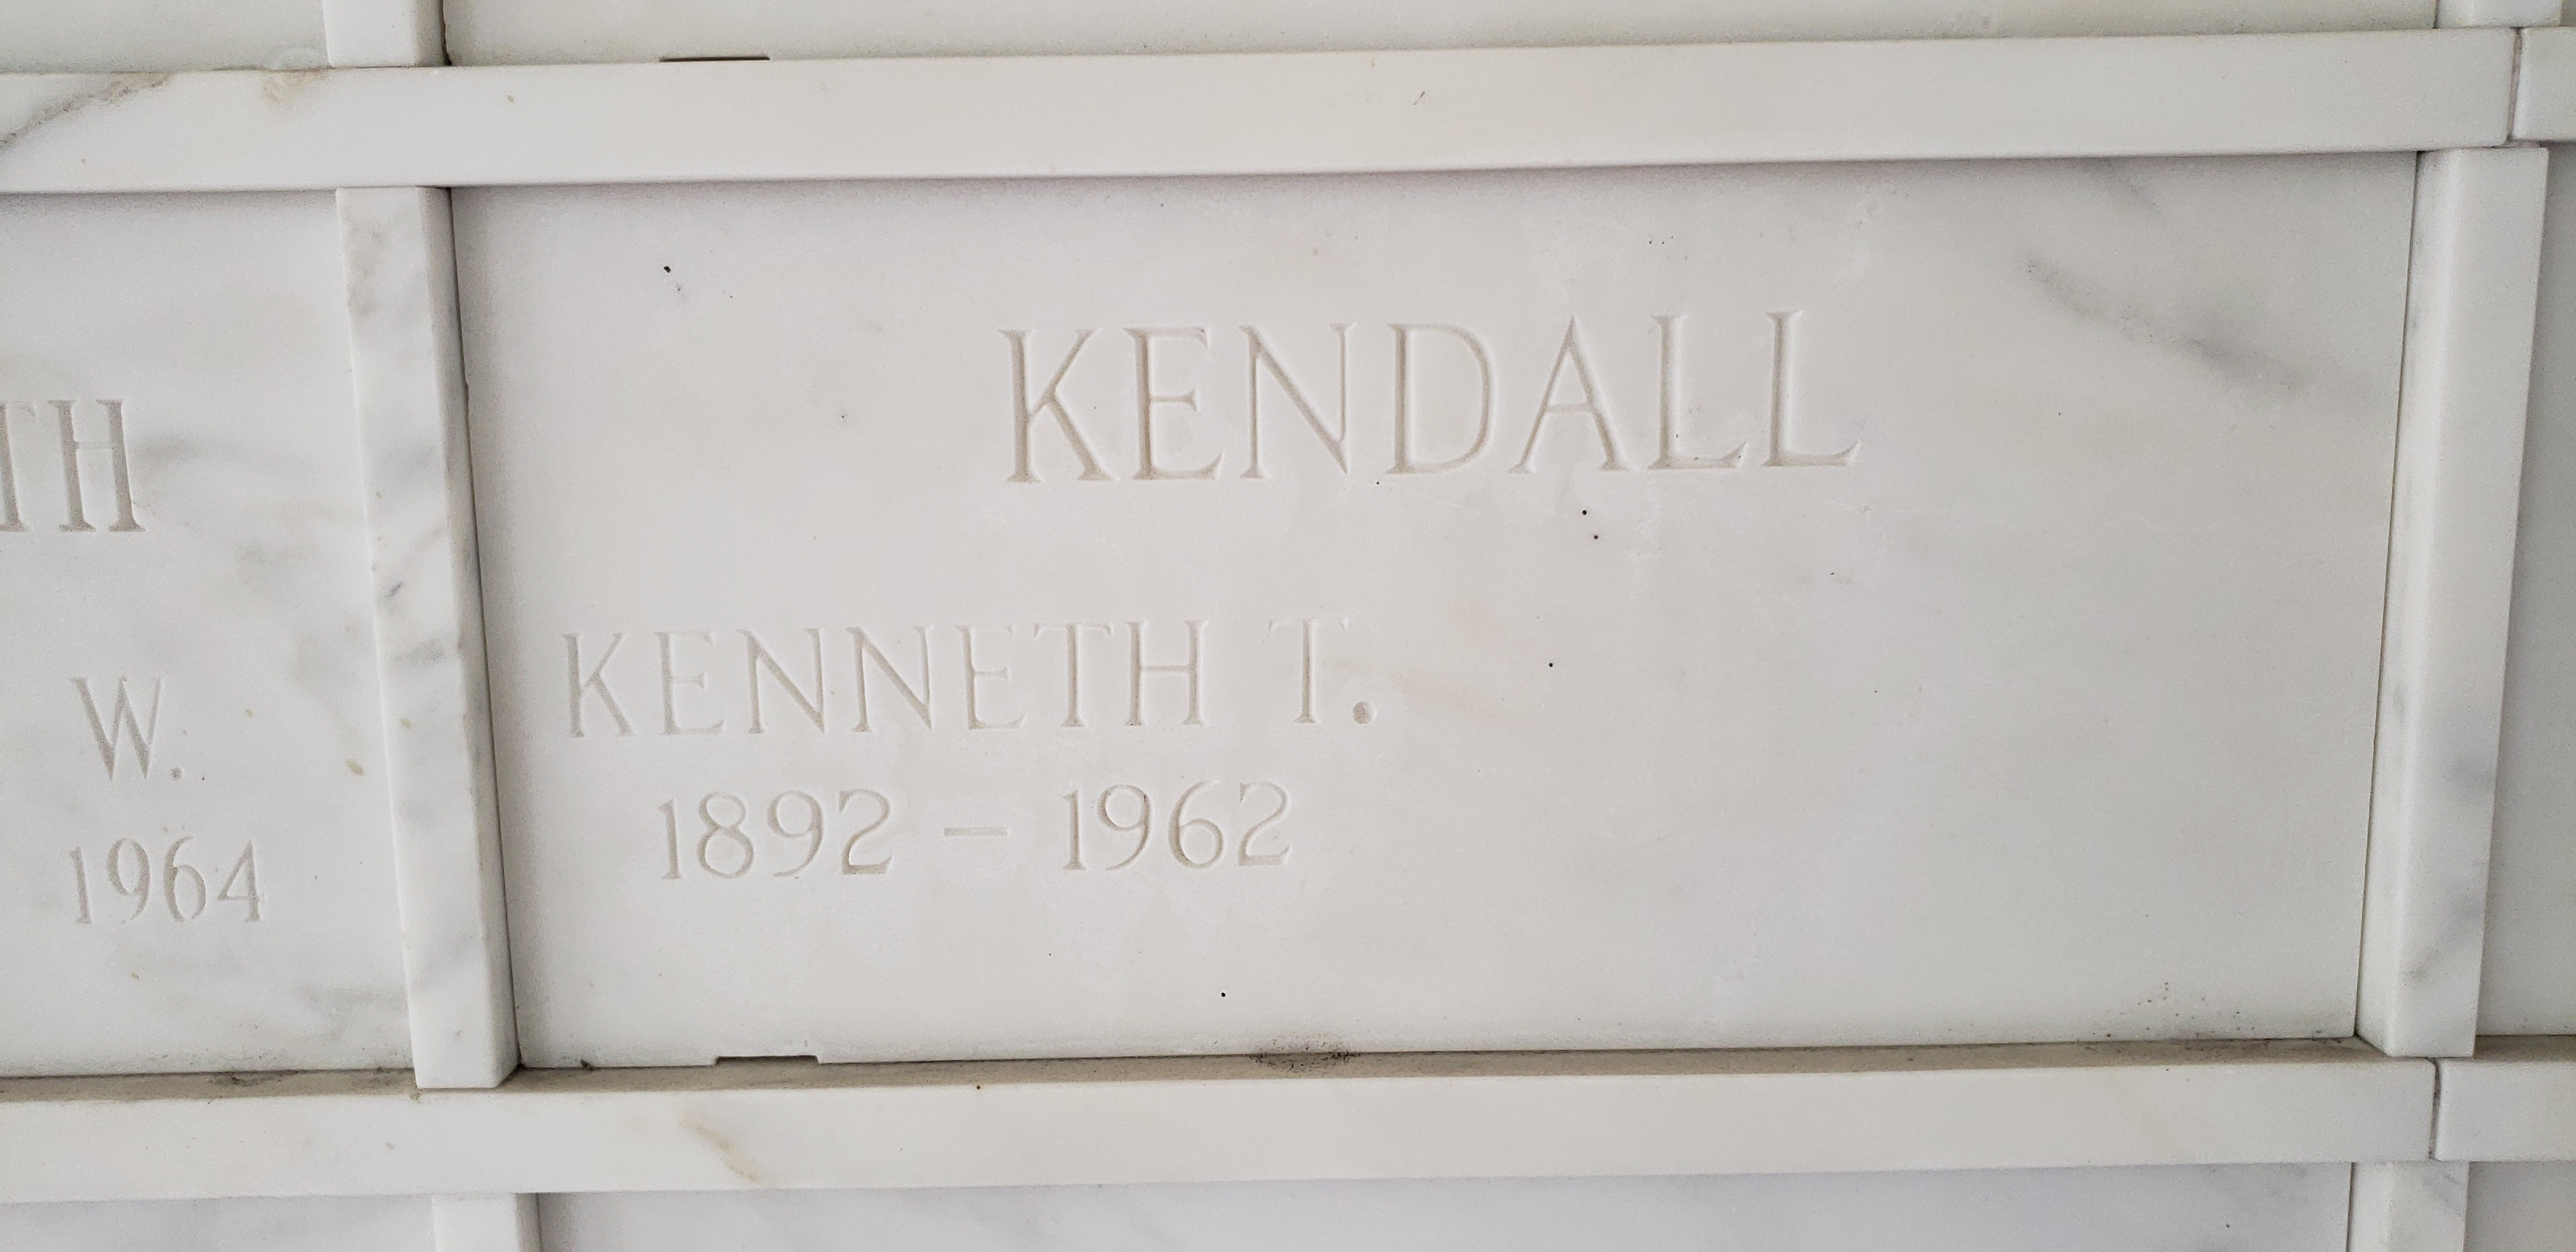 Kenneth T Kendall